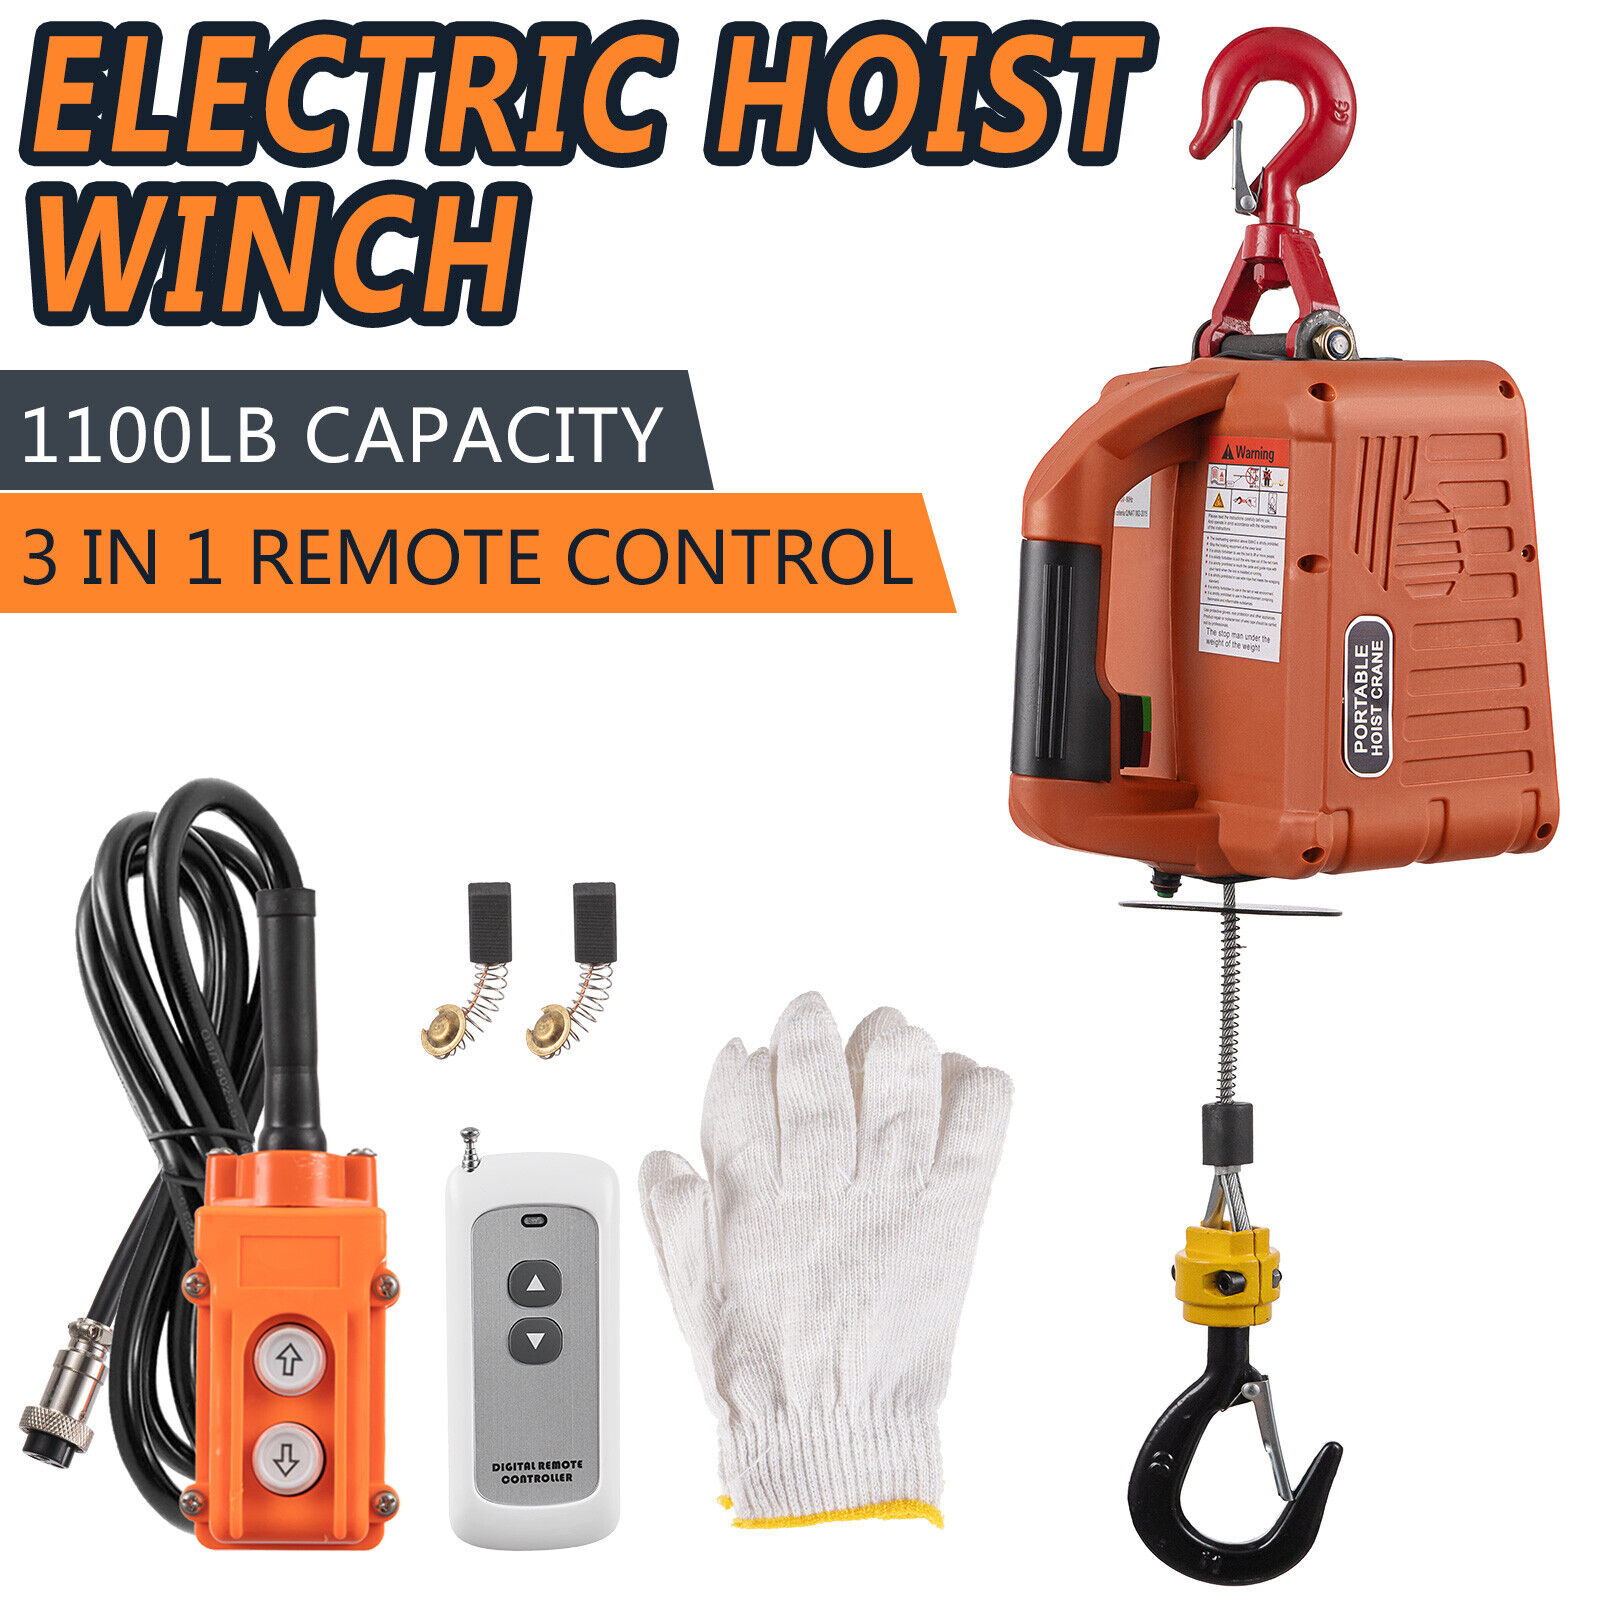 3 in 1 Electric Hoist Winch Portable Crane 1100lbs Wired/Wireless Remote Control